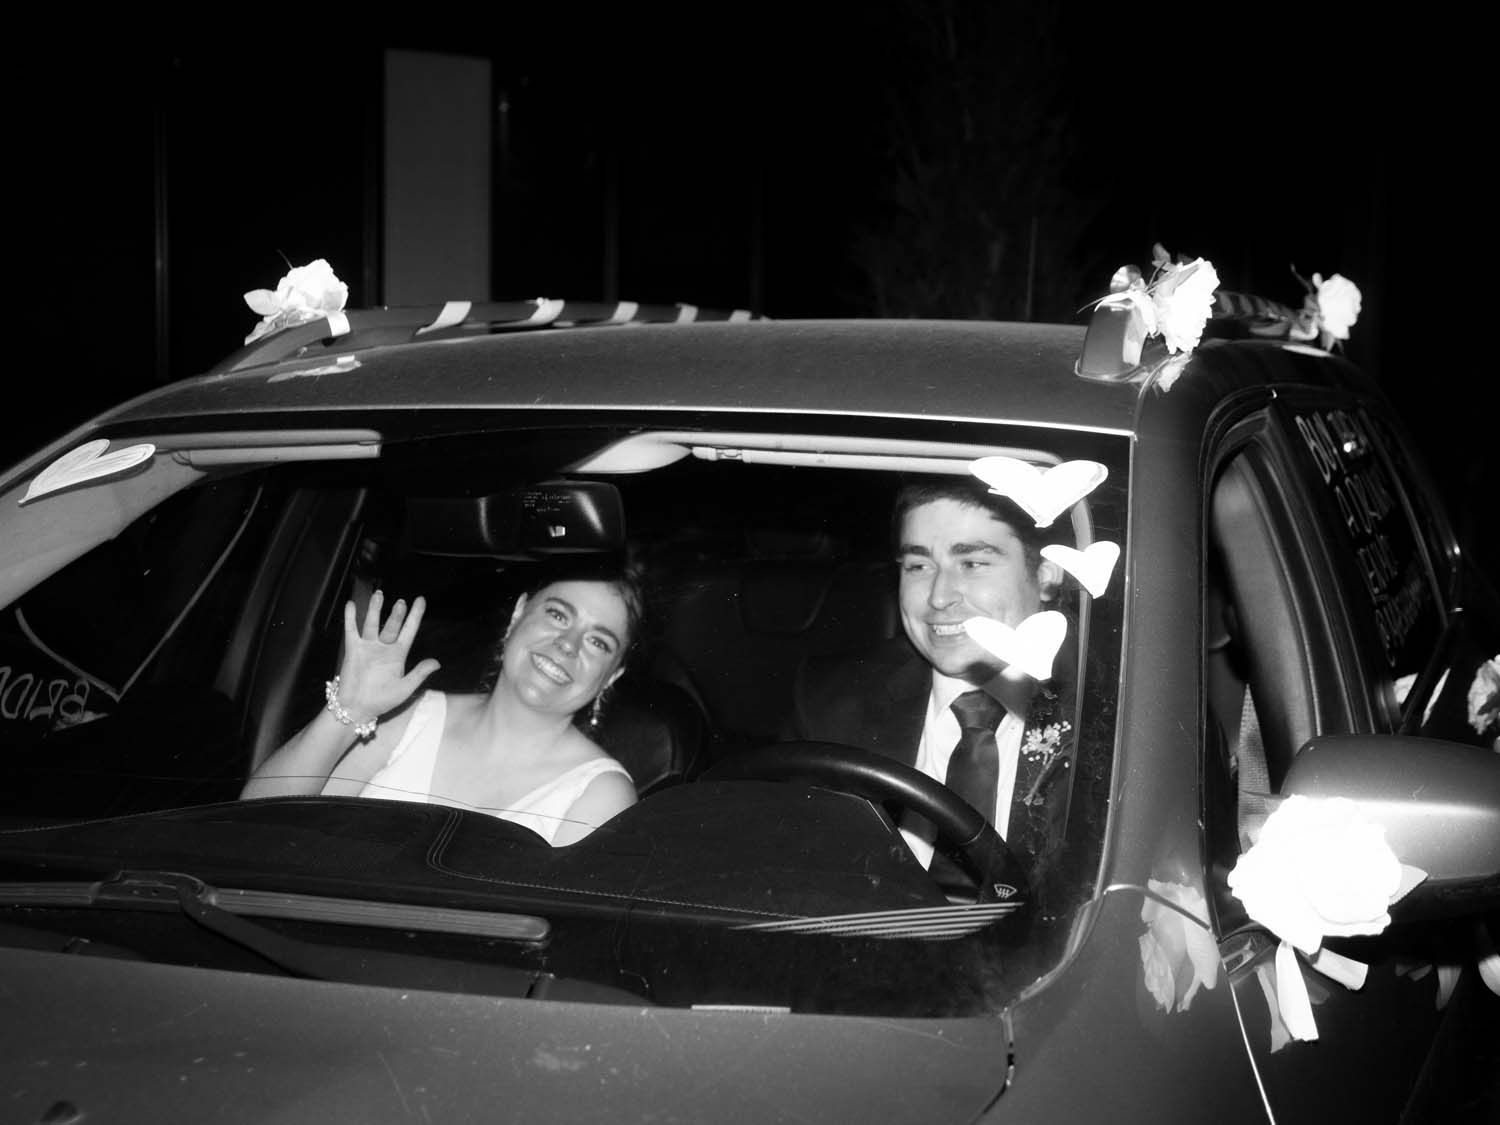 wedding couple in car driving away black and white